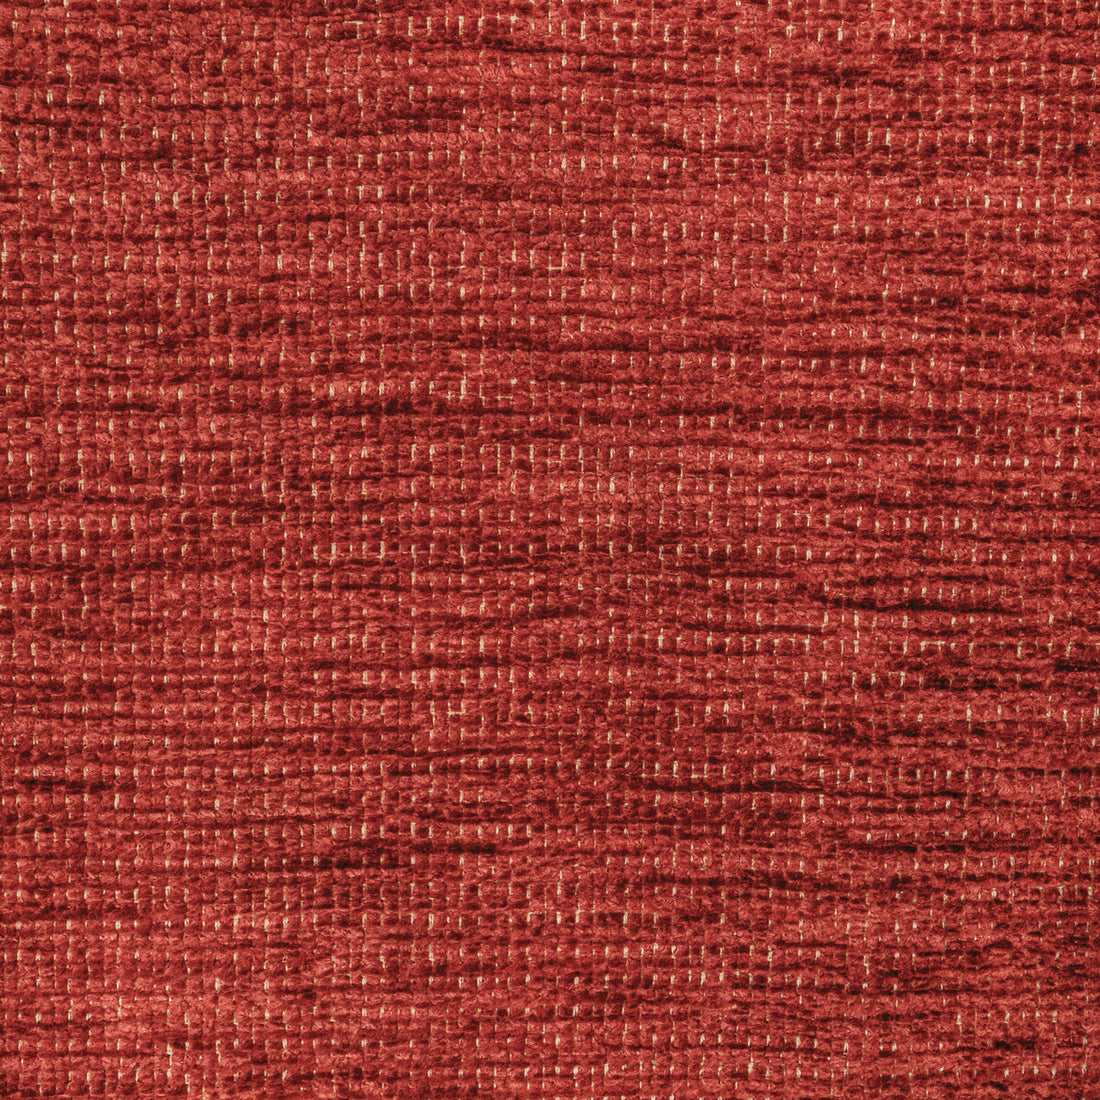 Lemenc Texture fabric in spice color - pattern 8022124.24.0 - by Brunschwig &amp; Fils in the Chambery Textures III collection